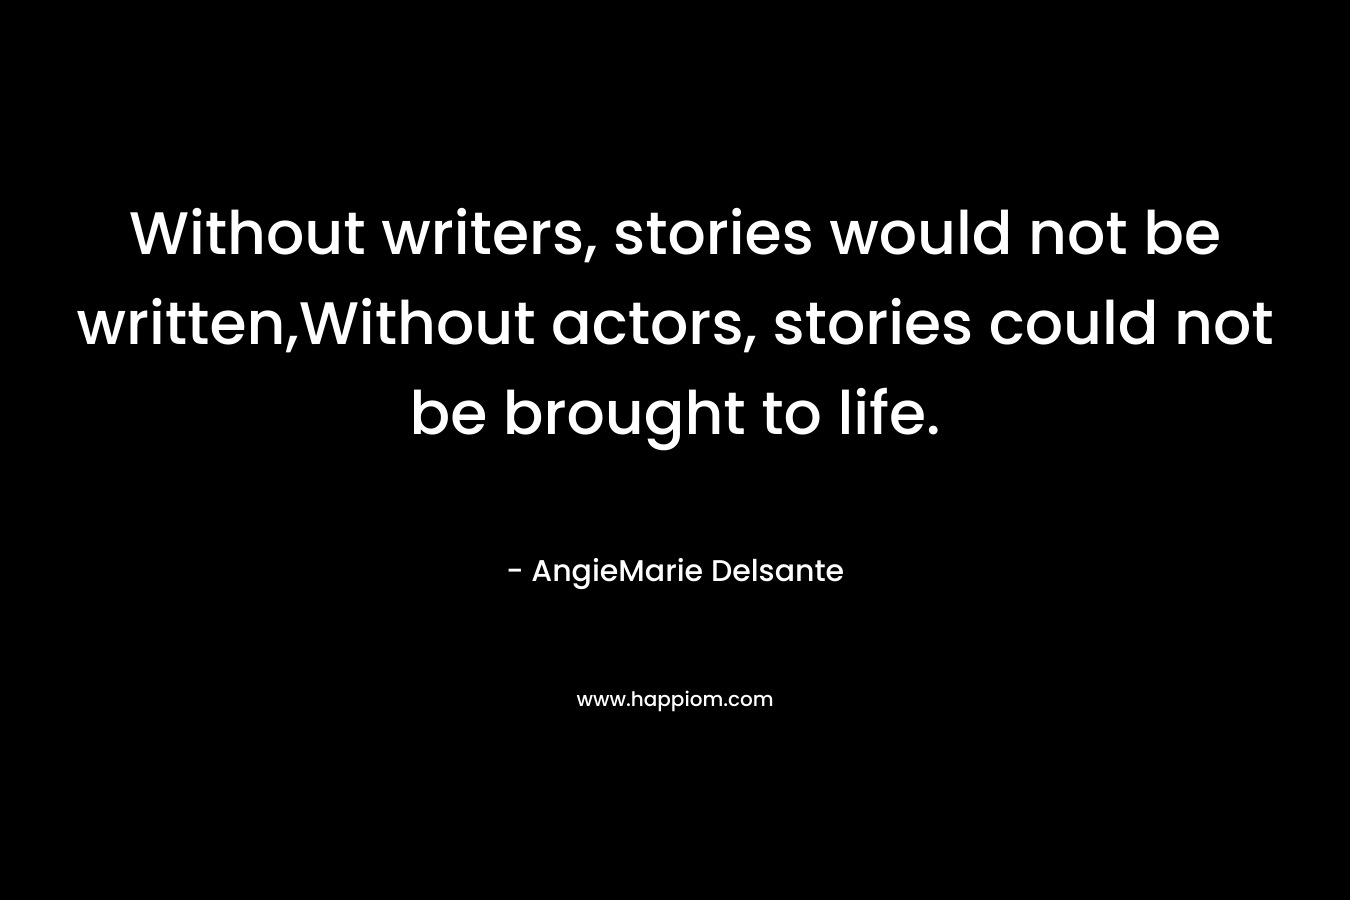 Without writers, stories would not be written,Without actors, stories could not be brought to life. – AngieMarie Delsante